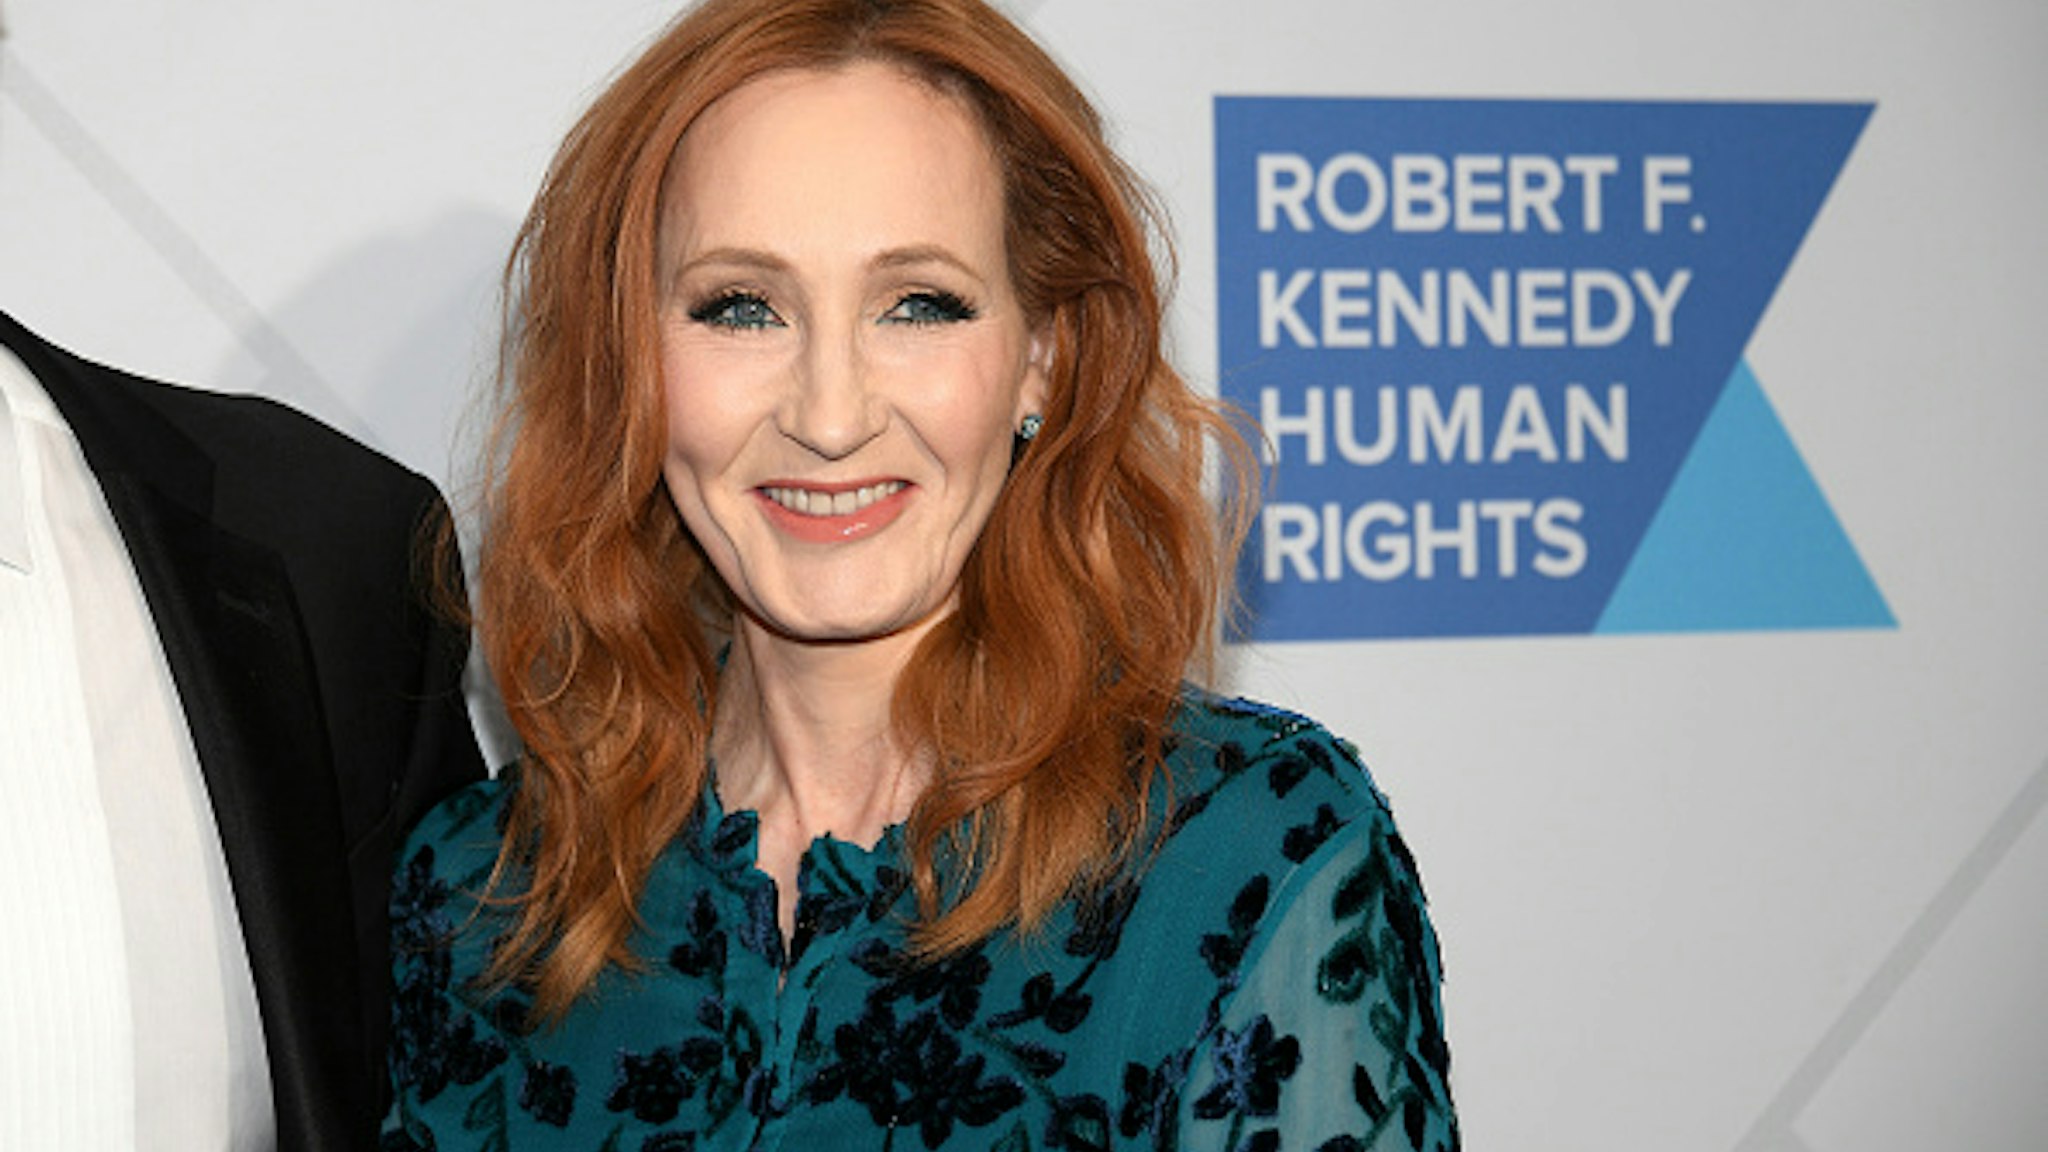 NEW YORK, NEW YORK - DECEMBER 12: Author J.K. Rowling arrives at the RFK Ripple of Hope Awards at New York Hilton Midtown on December 12, 2019 in New York City.